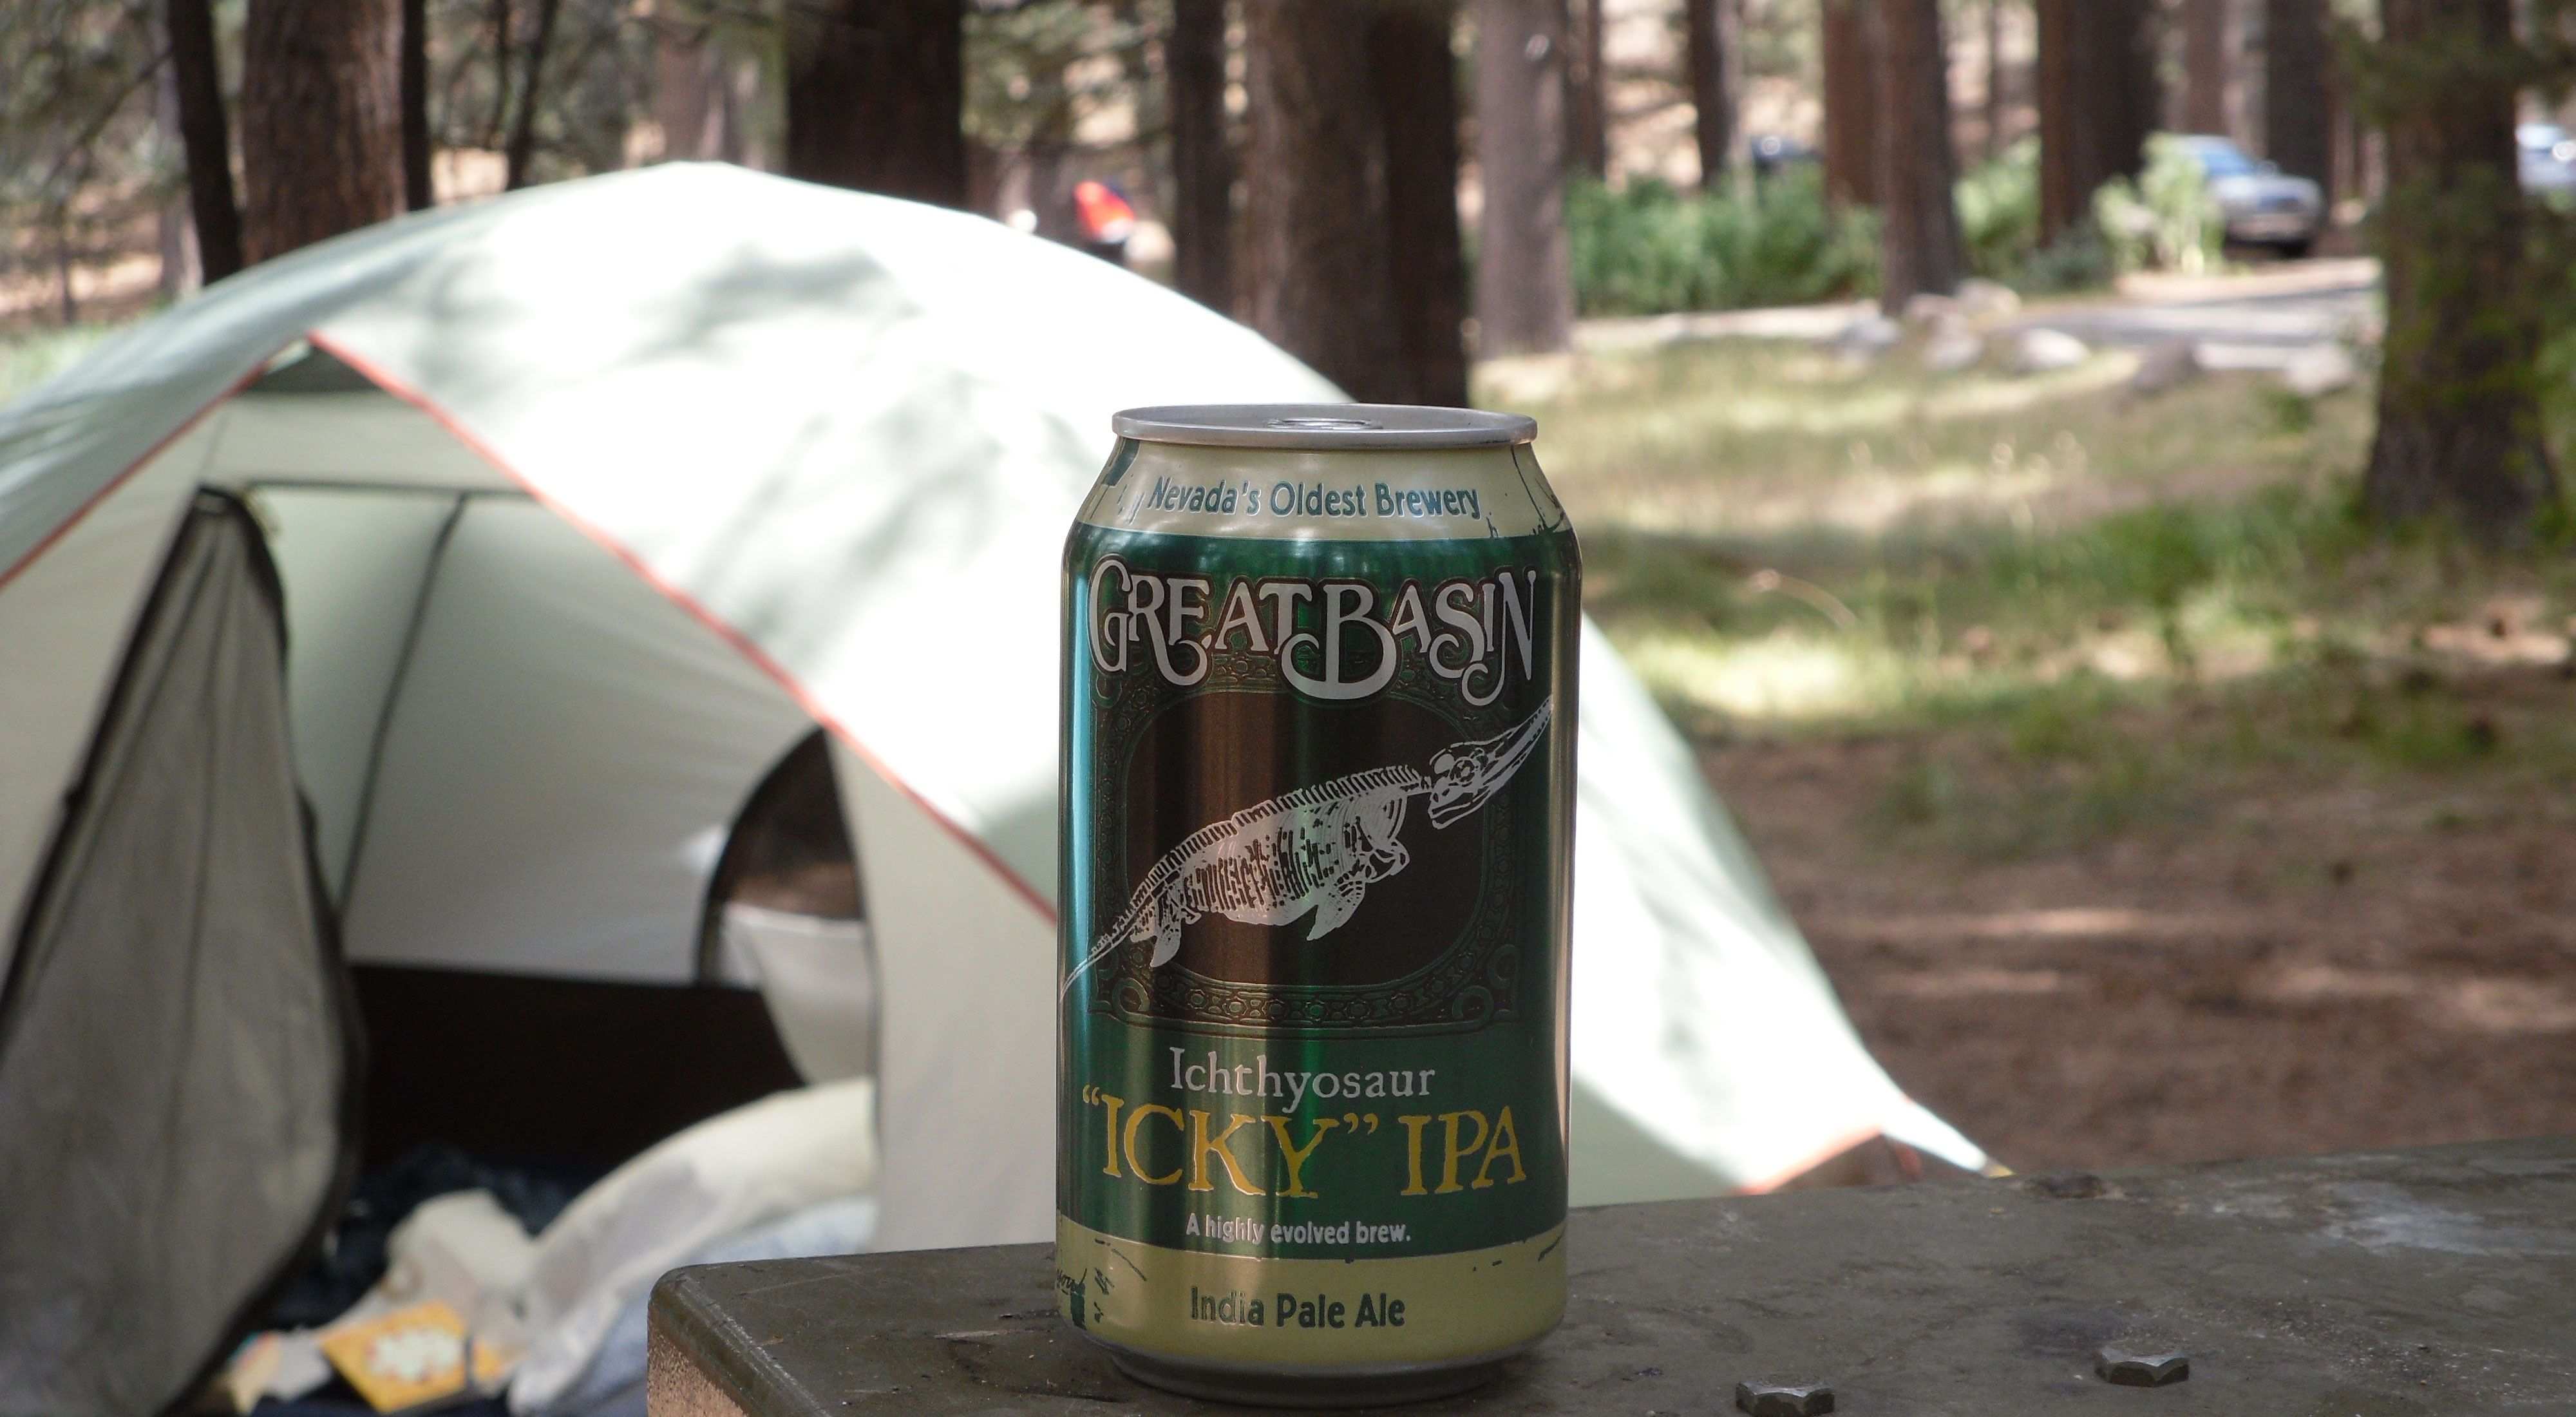 Camping with an IPA from OktoberForest participant brewery Great Basin in Nevada.